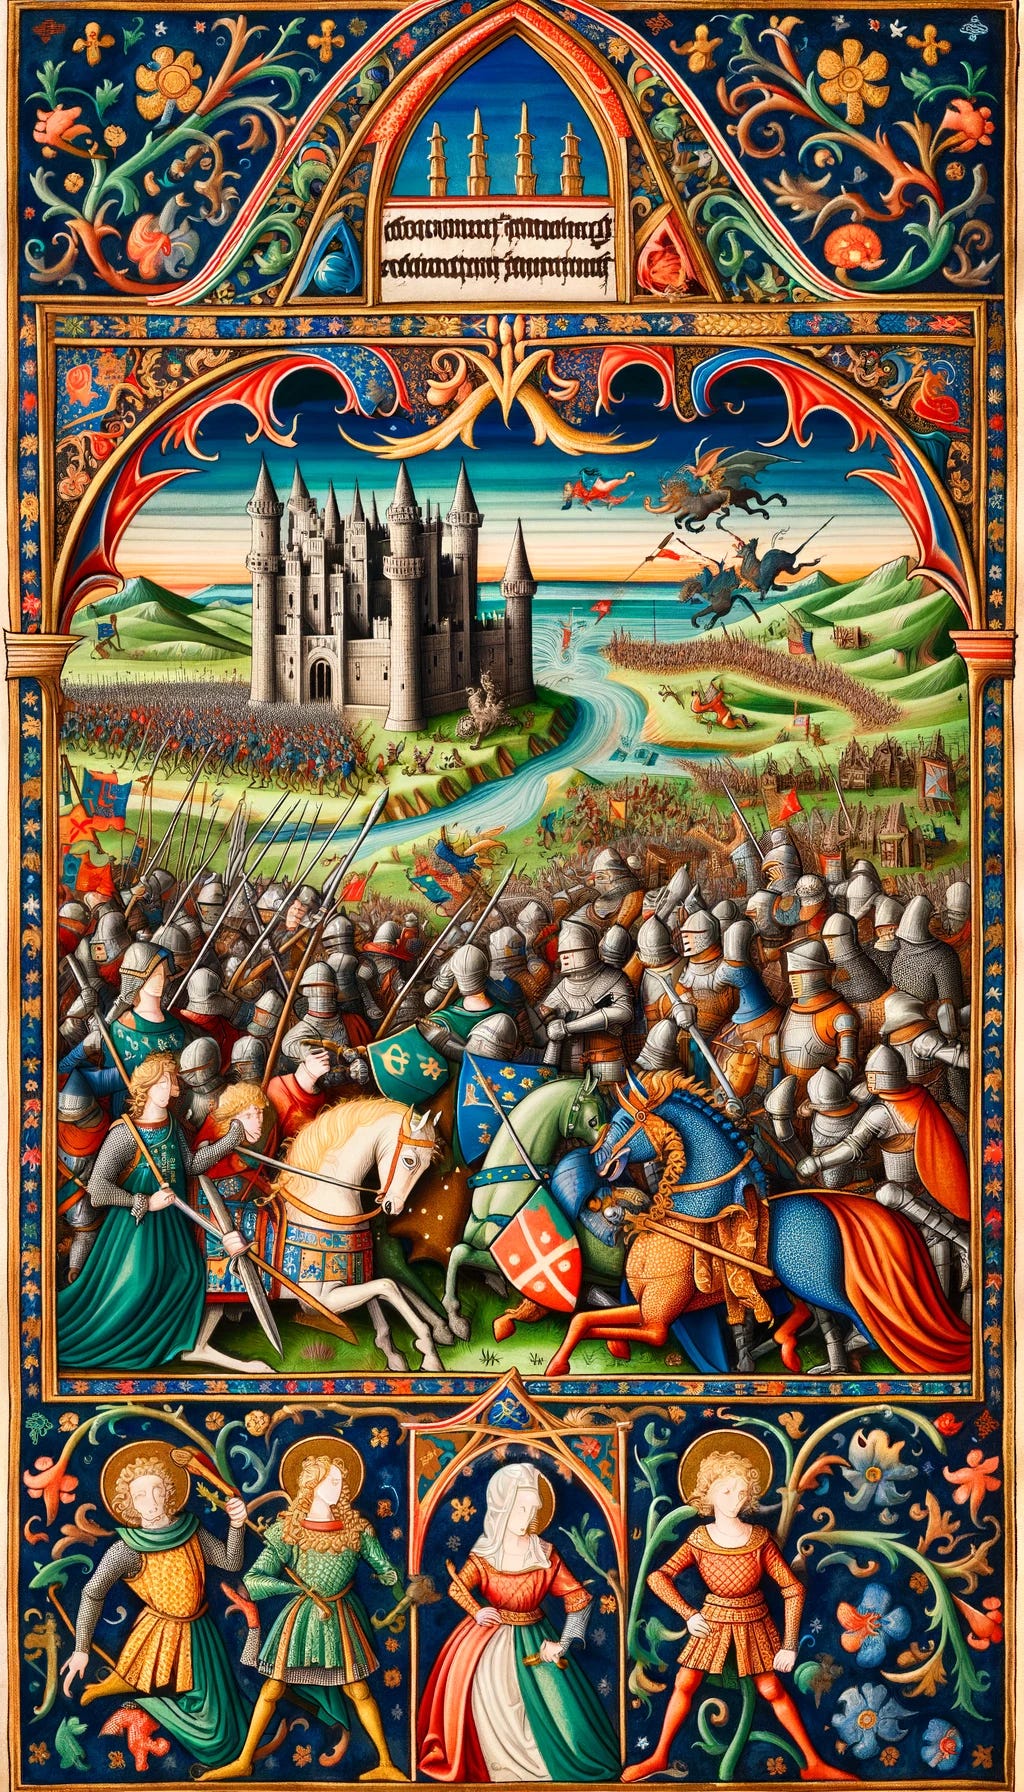 A meticulously detailed illuminated manuscript illustration depicting a scene from the crisis of the 12th century, showcasing knights in battle, villagers fleeing, and a castle under siege in the background. The image is rich with medieval iconography, including banners with coats of arms, and a border adorned with intricate patterns and small illustrations of mythical beasts and flora. The colors are vibrant, with gold leaf accents highlighting important elements and figures. The style is reminiscent of historical manuscripts from the period, emphasizing the drama and turmoil of the times in a portrait orientation.